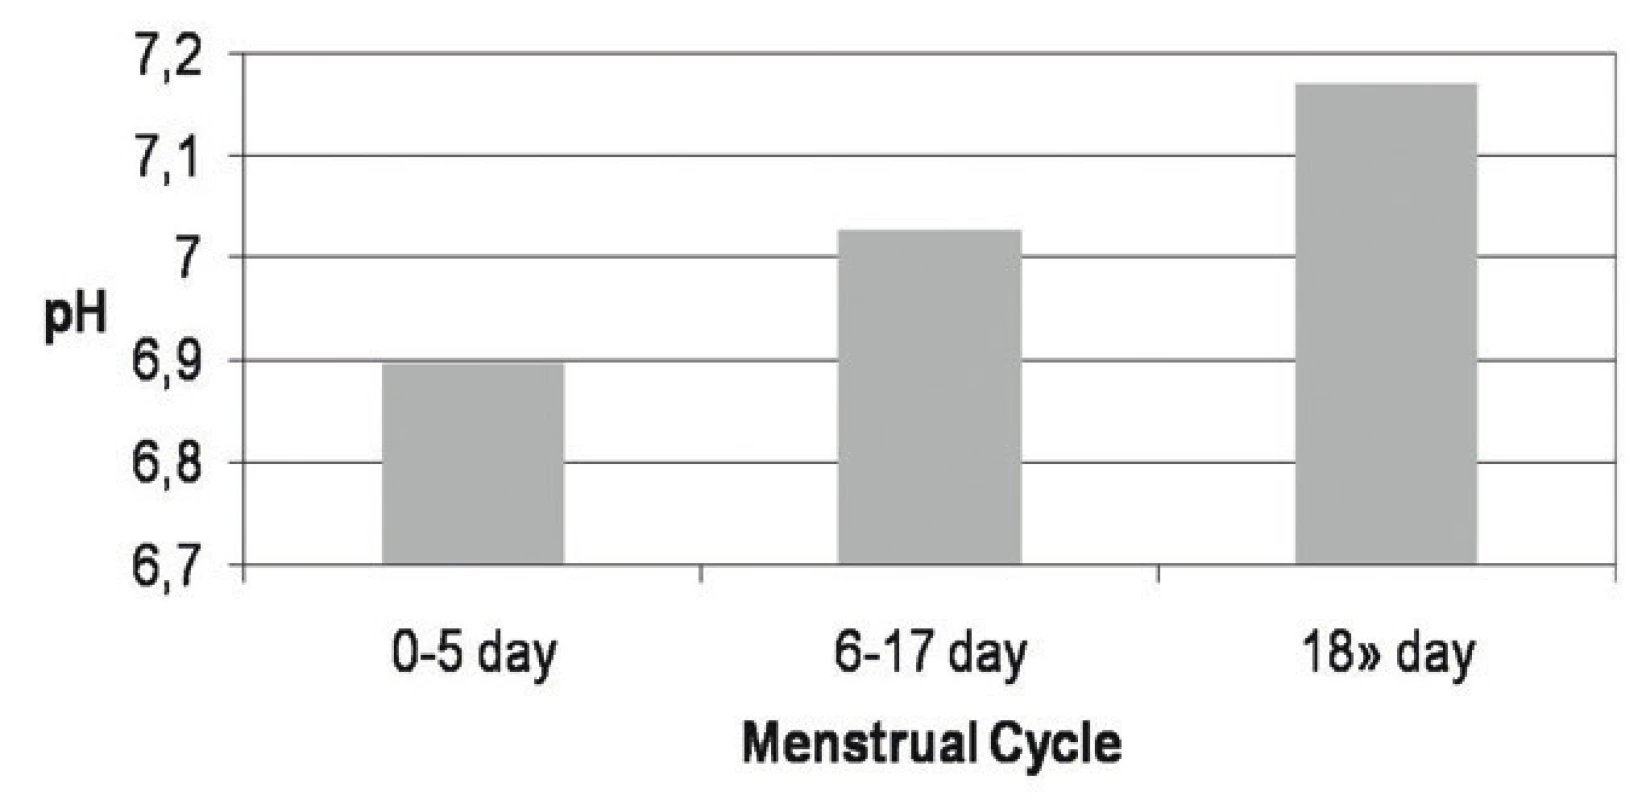 pH values of native saliva according to the menstrual cycle in all studied samples